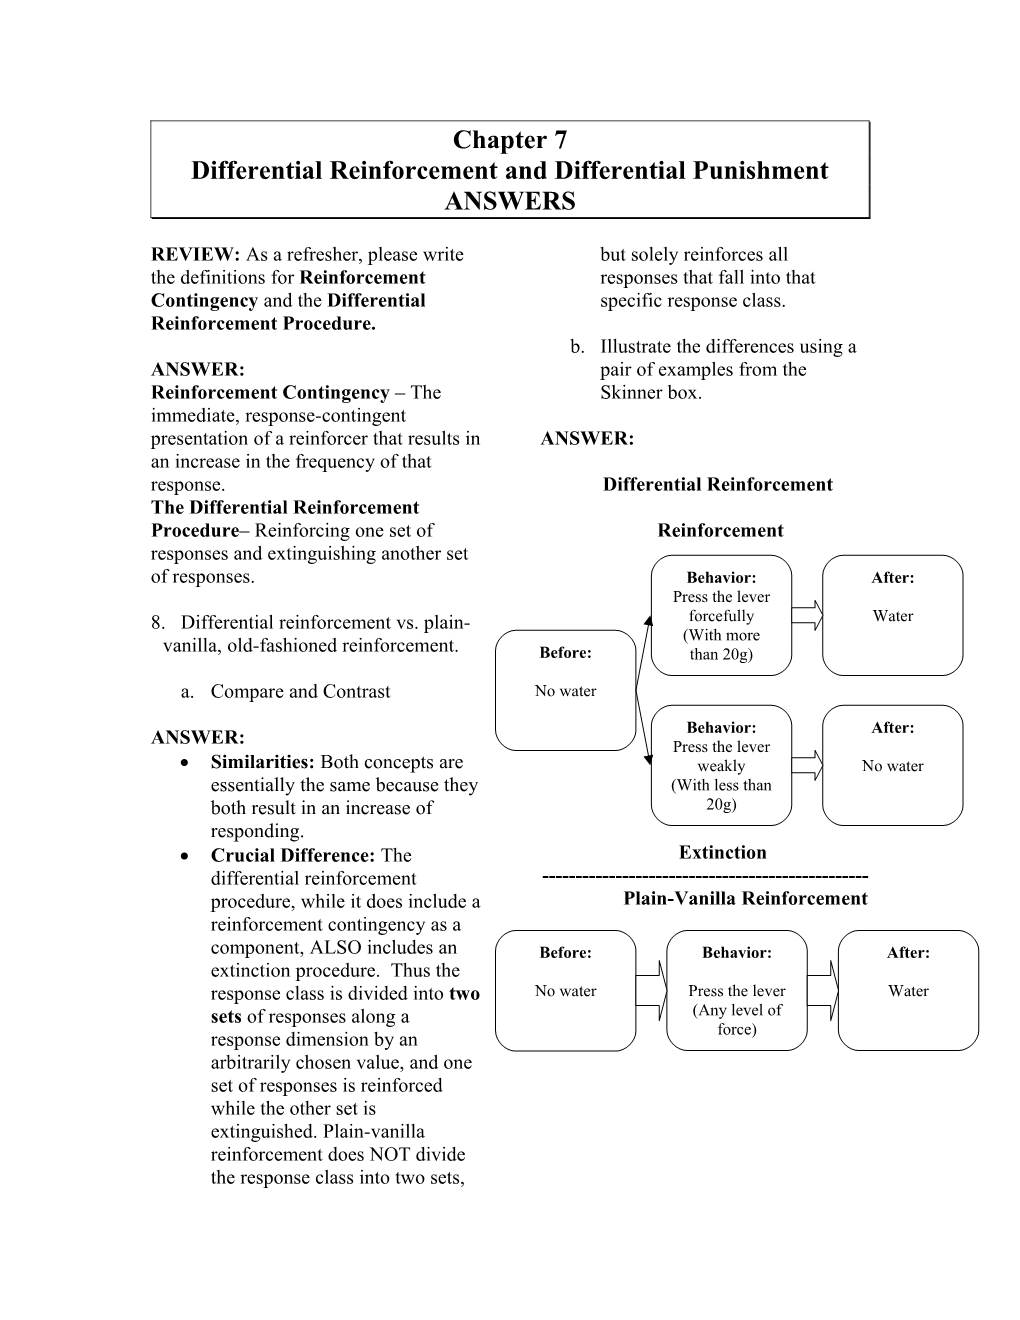 Differential Reinforcement and Differential Punishment